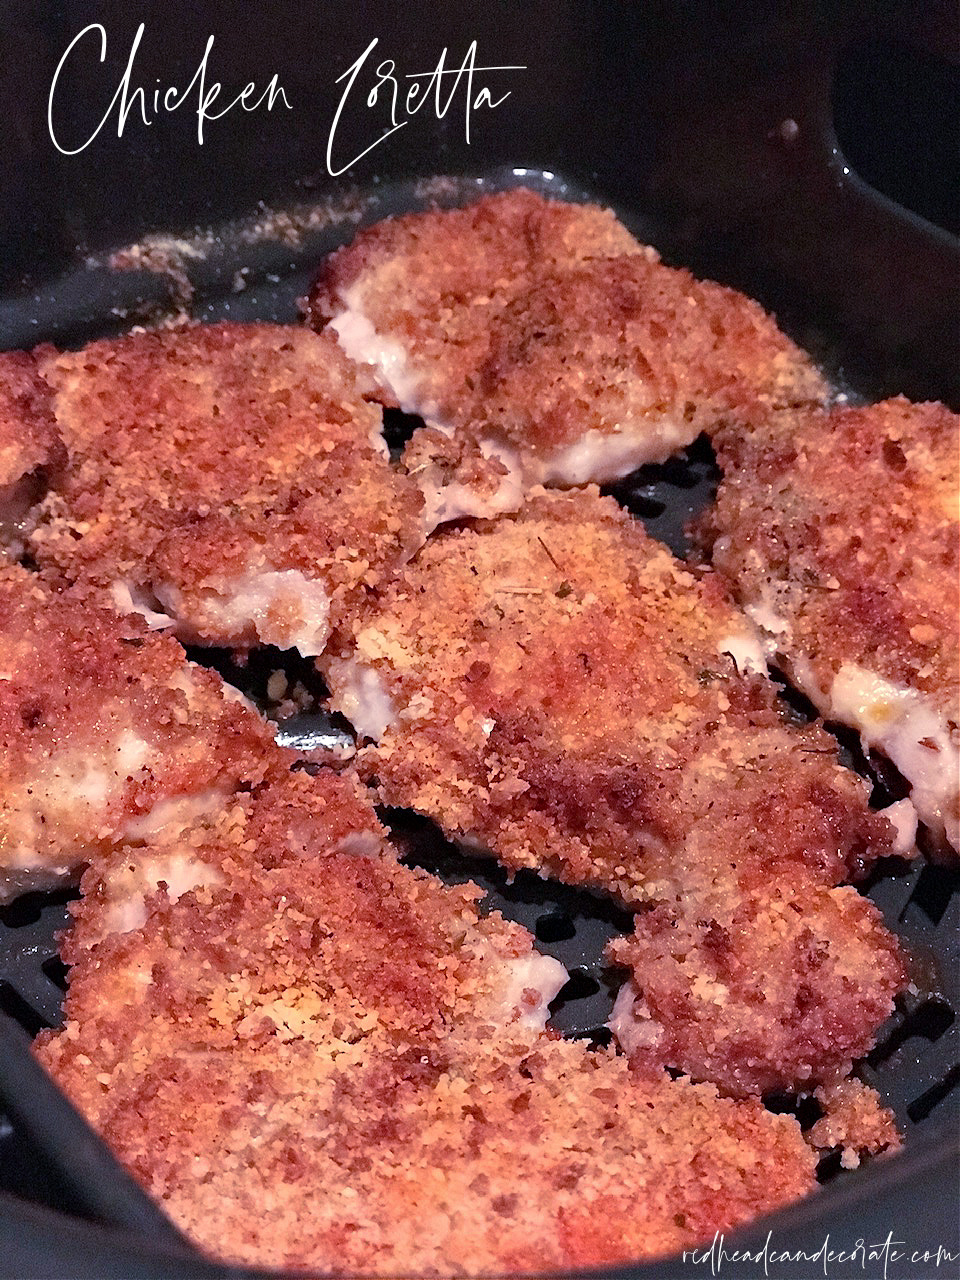 Looking for a tender chicken recipe? This "Chicken Loretta" recipe is the most tender flavorful chicken I have ever made so easily!